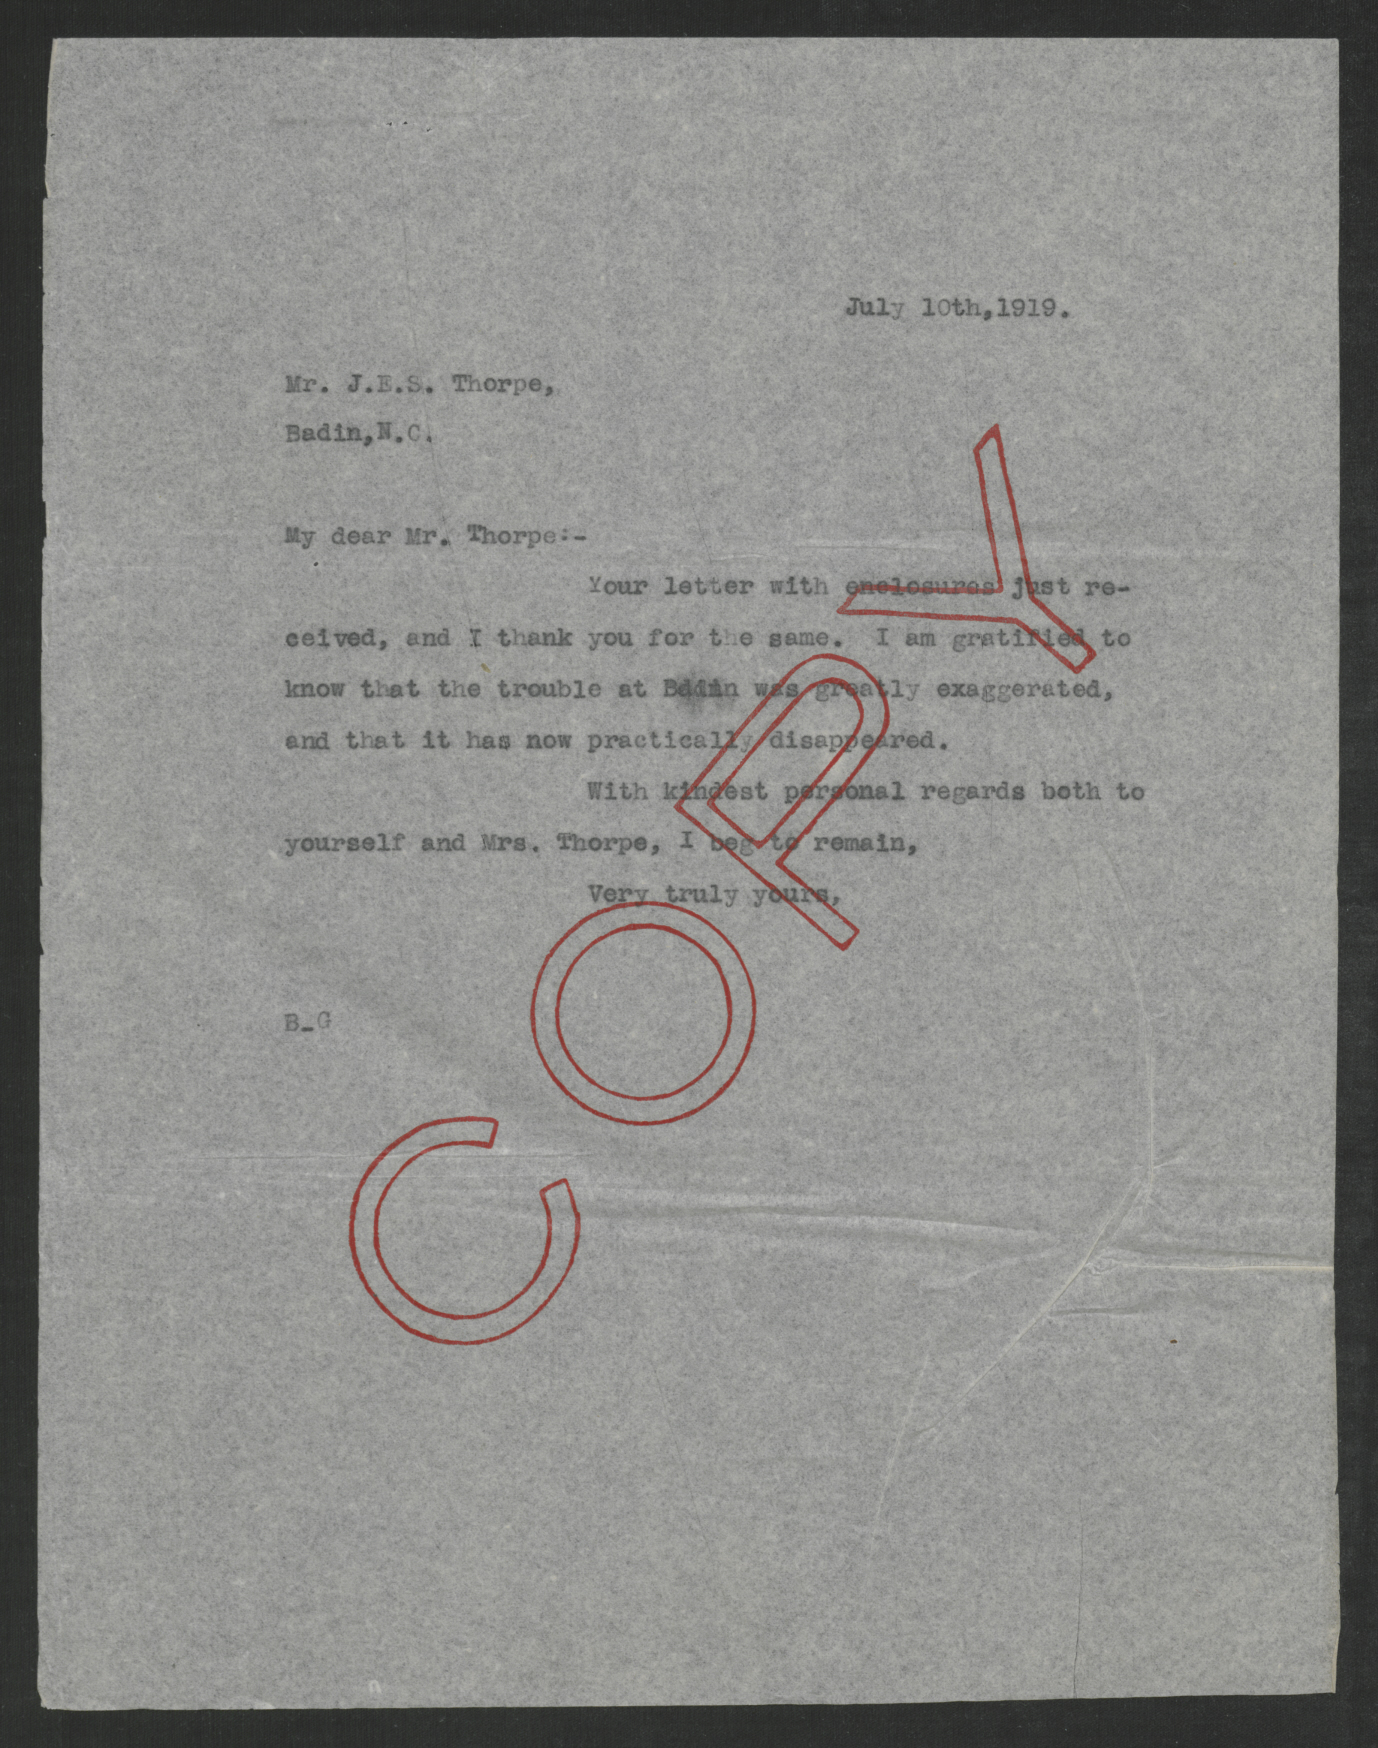 Letter from Thomas W. Bickett to John E. S. Thorpe, July 10, 1919